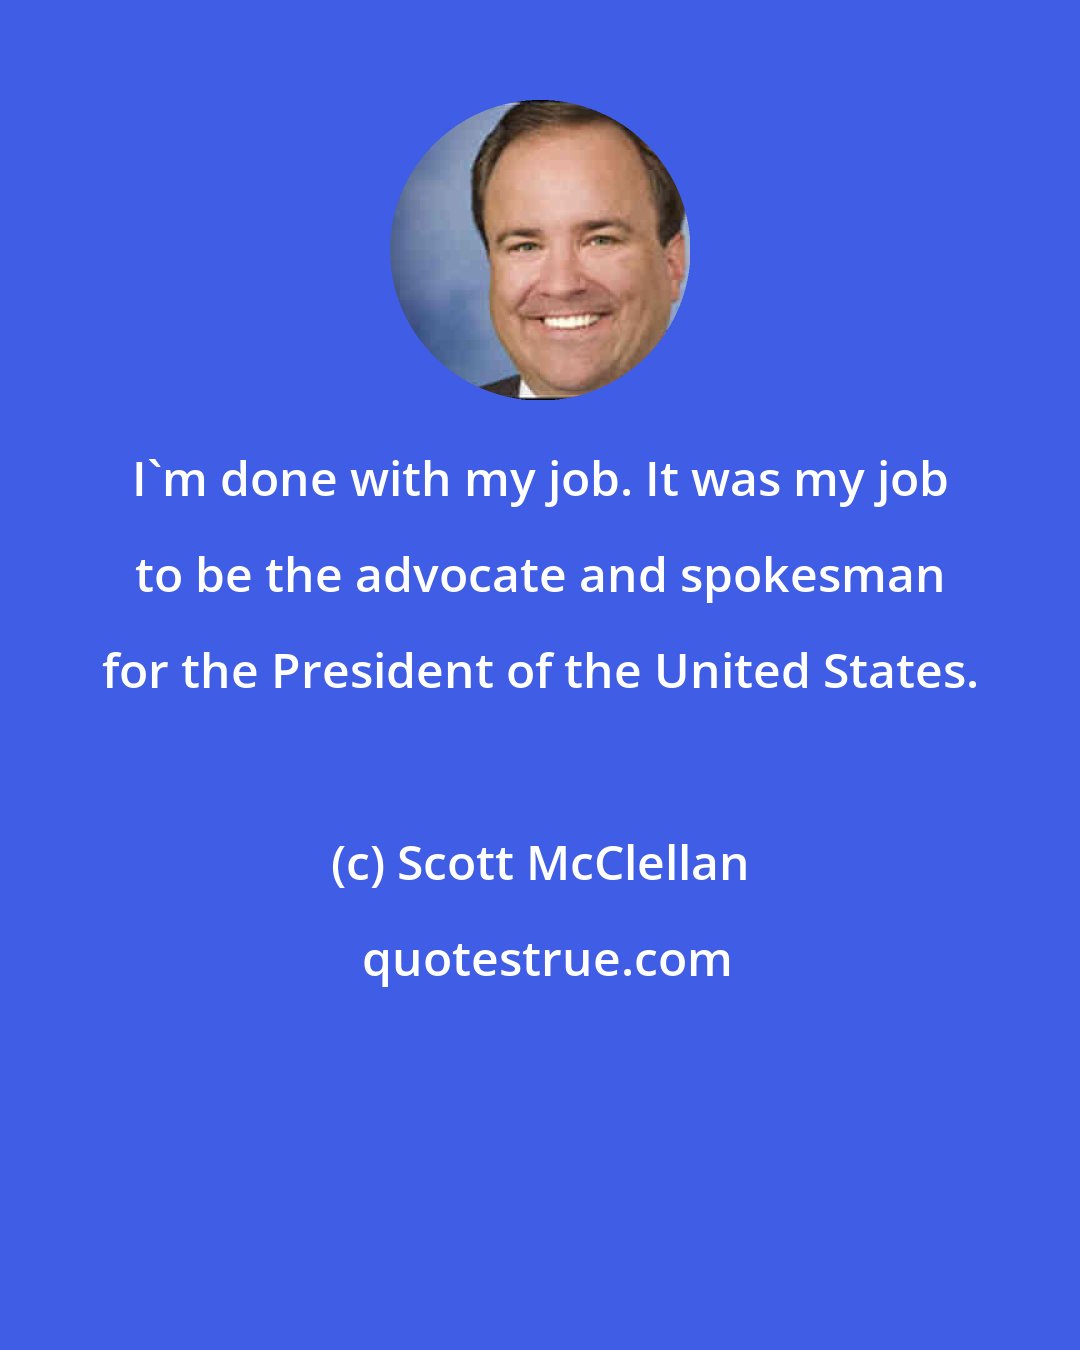 Scott McClellan: I'm done with my job. It was my job to be the advocate and spokesman for the President of the United States.